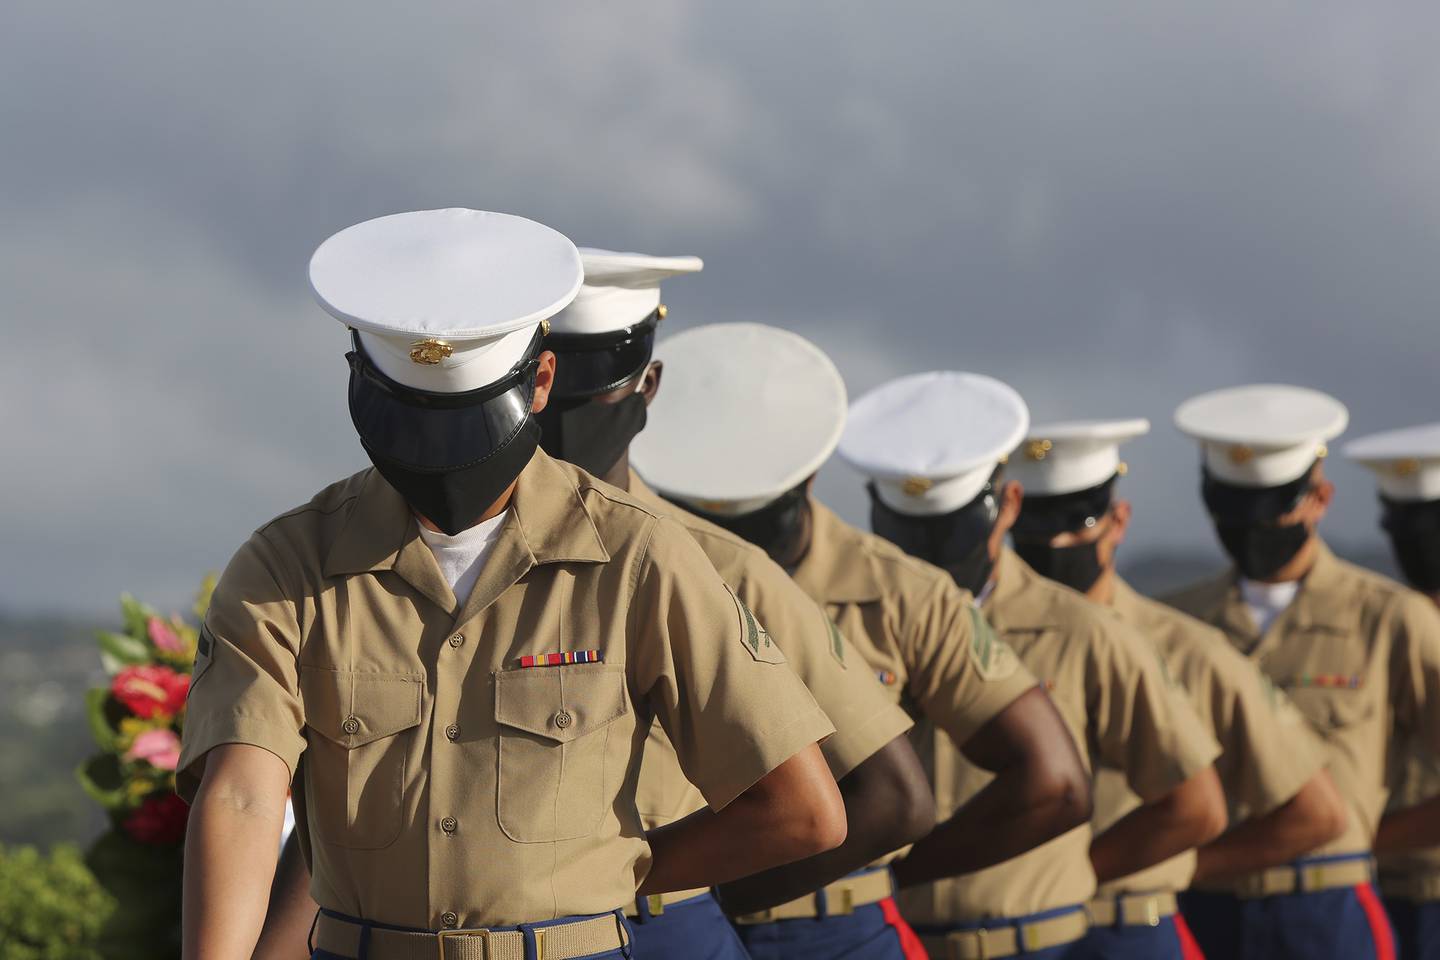 Marines wearing masks pause during a prayer at a ceremony marking the attack on Pearl Harbor, Monday, Dec. 7, 2020, in Pearl Harbor, Hawaii.